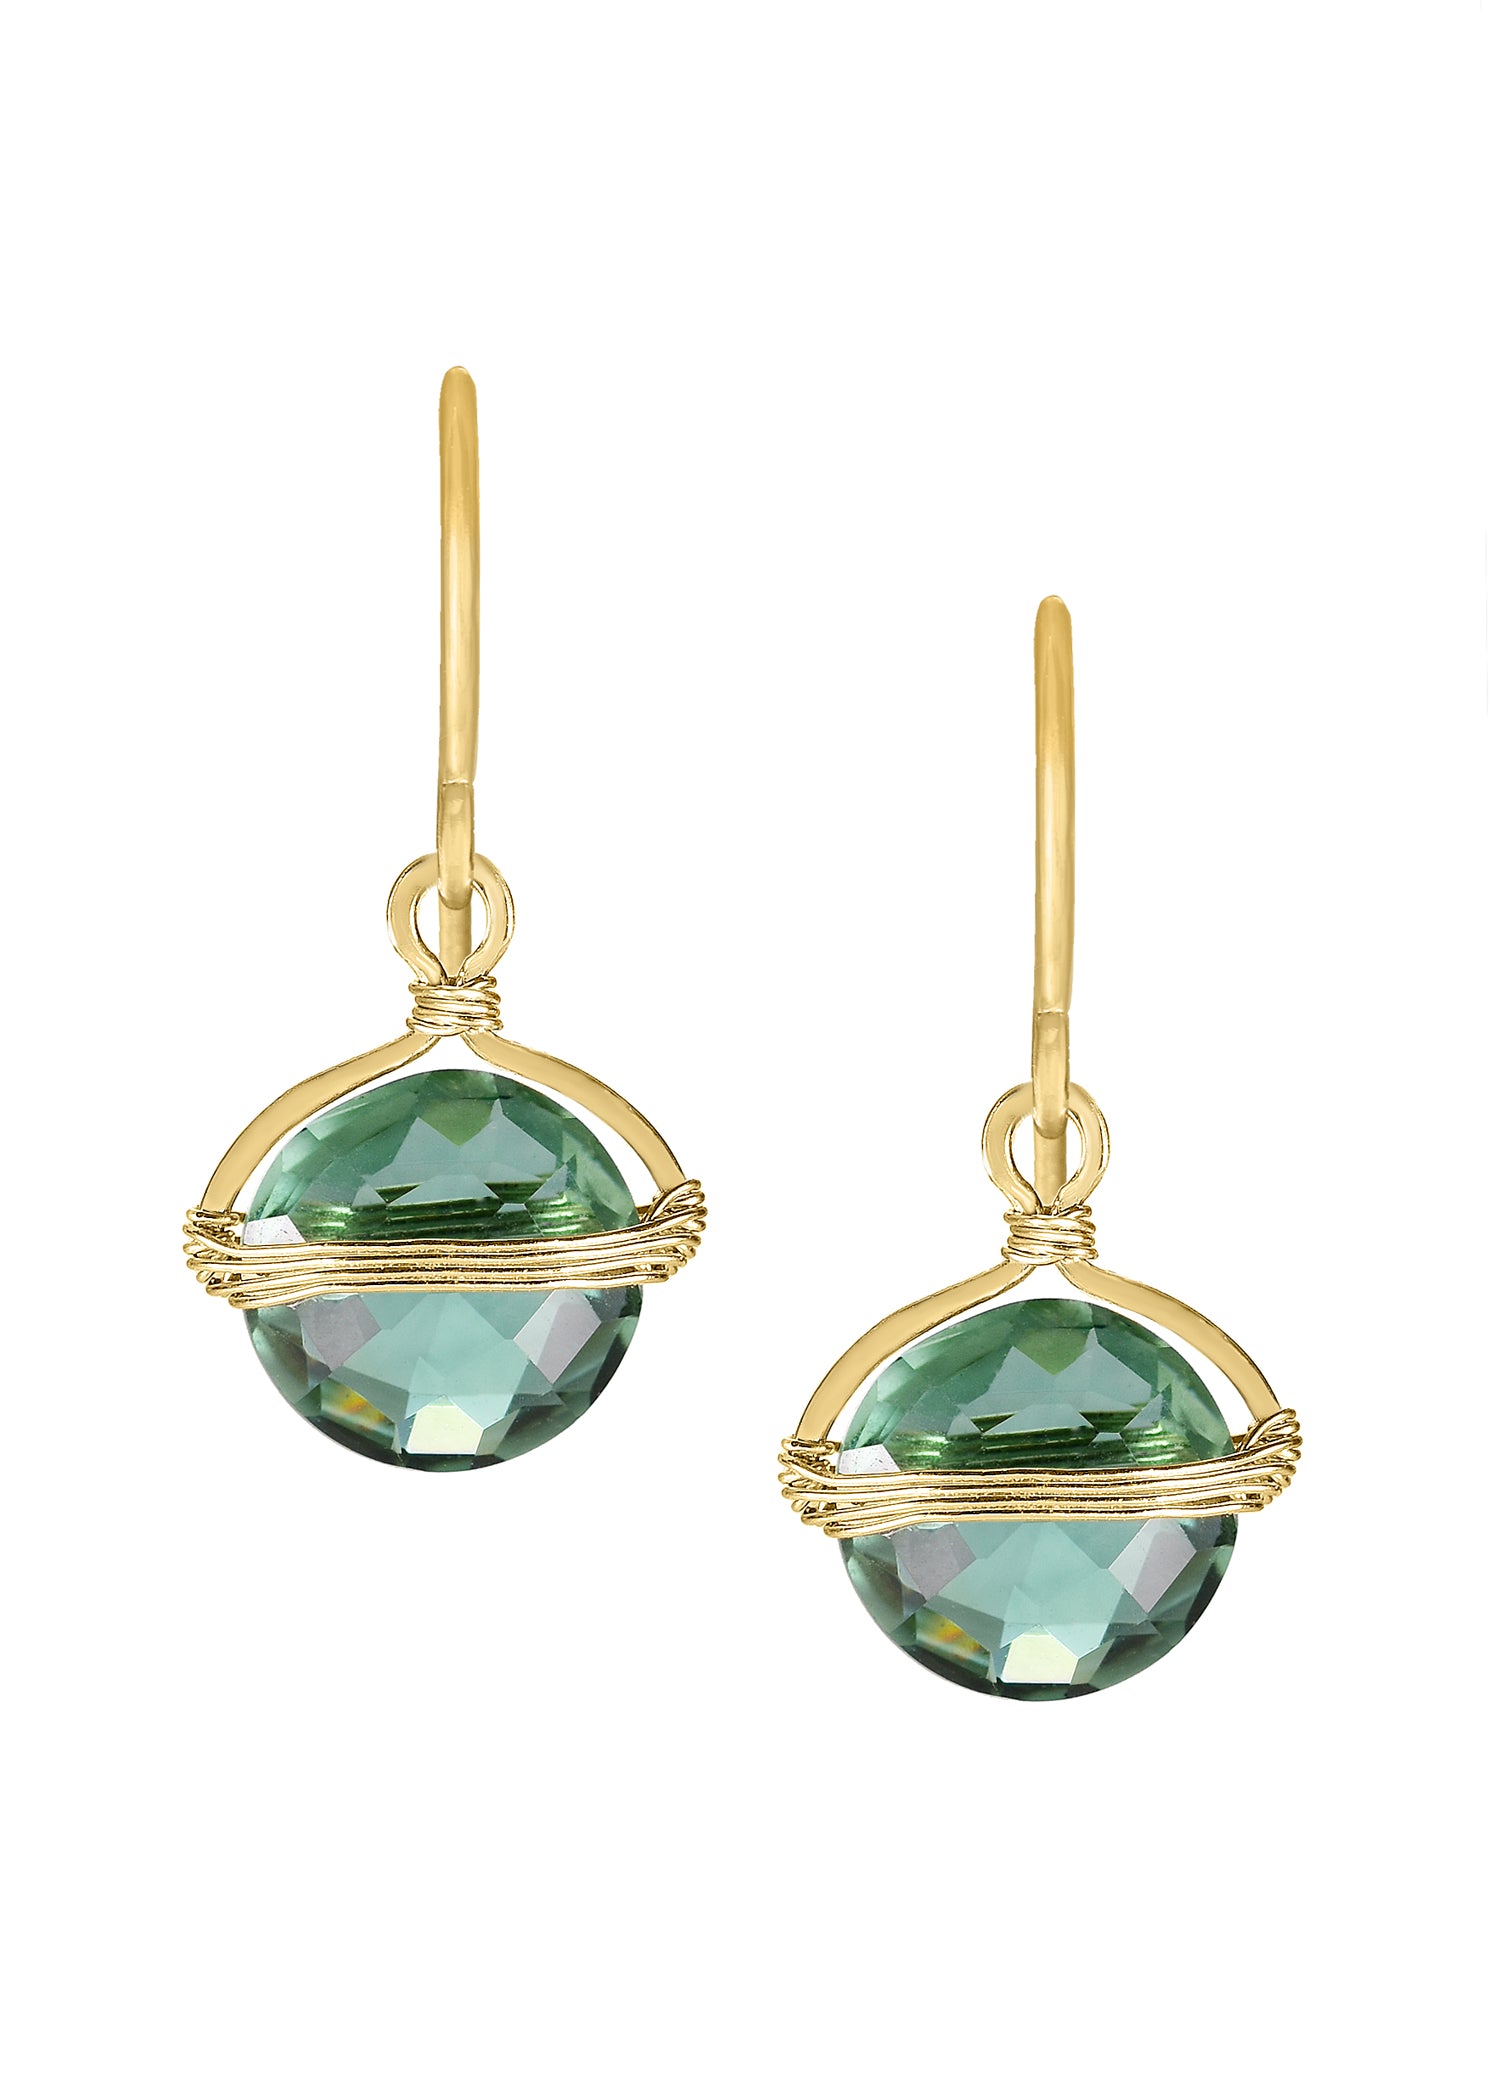 Green quartz 14k gold fill Earrings measure 3/4" in length (including the ear wires) and 3/8" in width Handmade in our Los Angeles studio